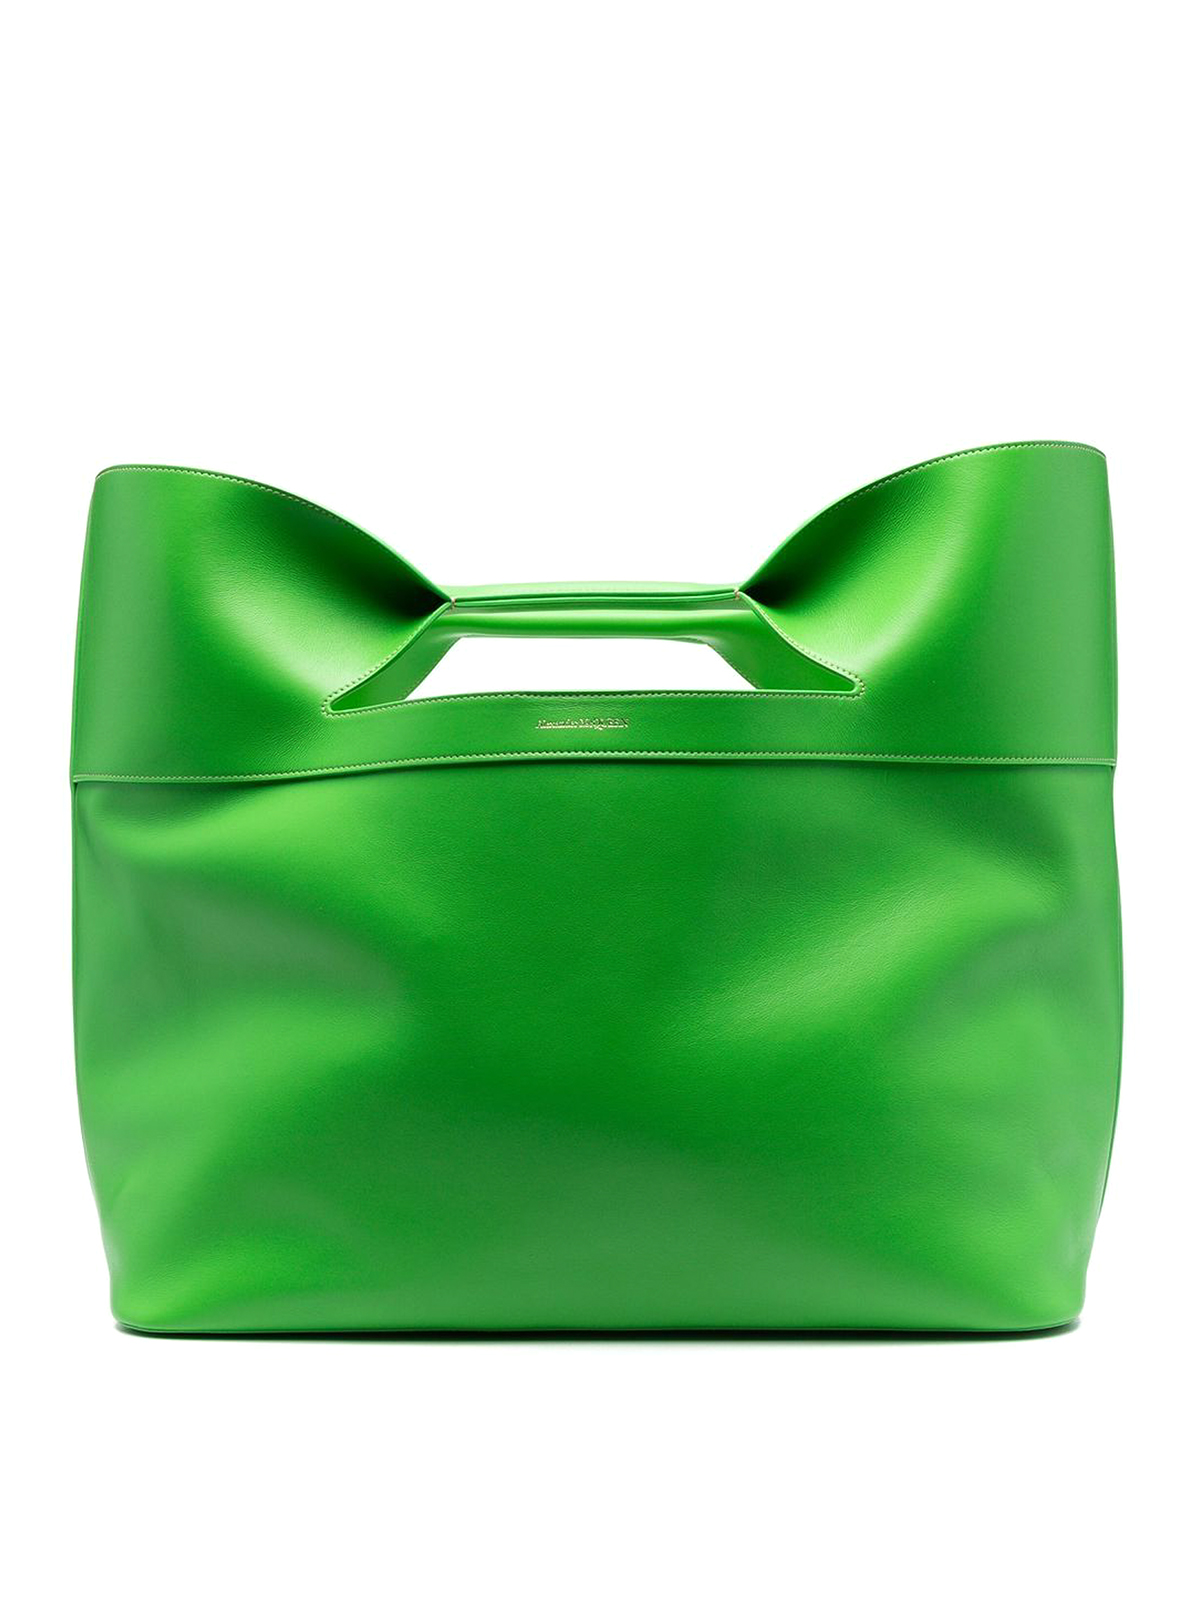 Your Look at the New Alexander McQueen The Curve Bag - PurseBlog